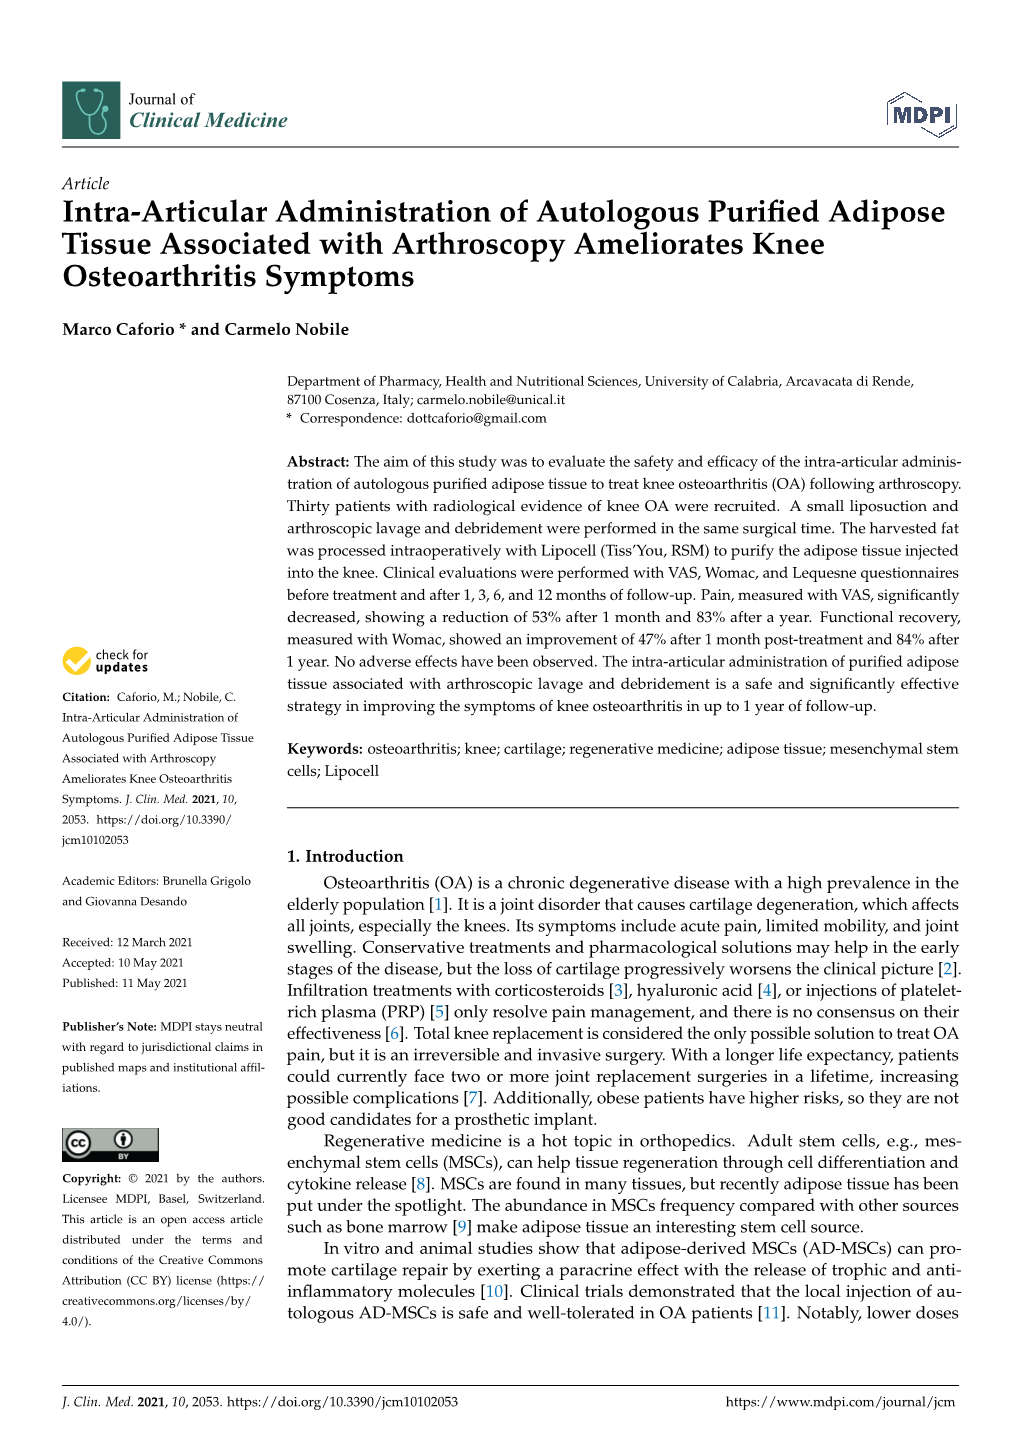 Intra-Articular Administration of Autologous Purified Adipose Tissue